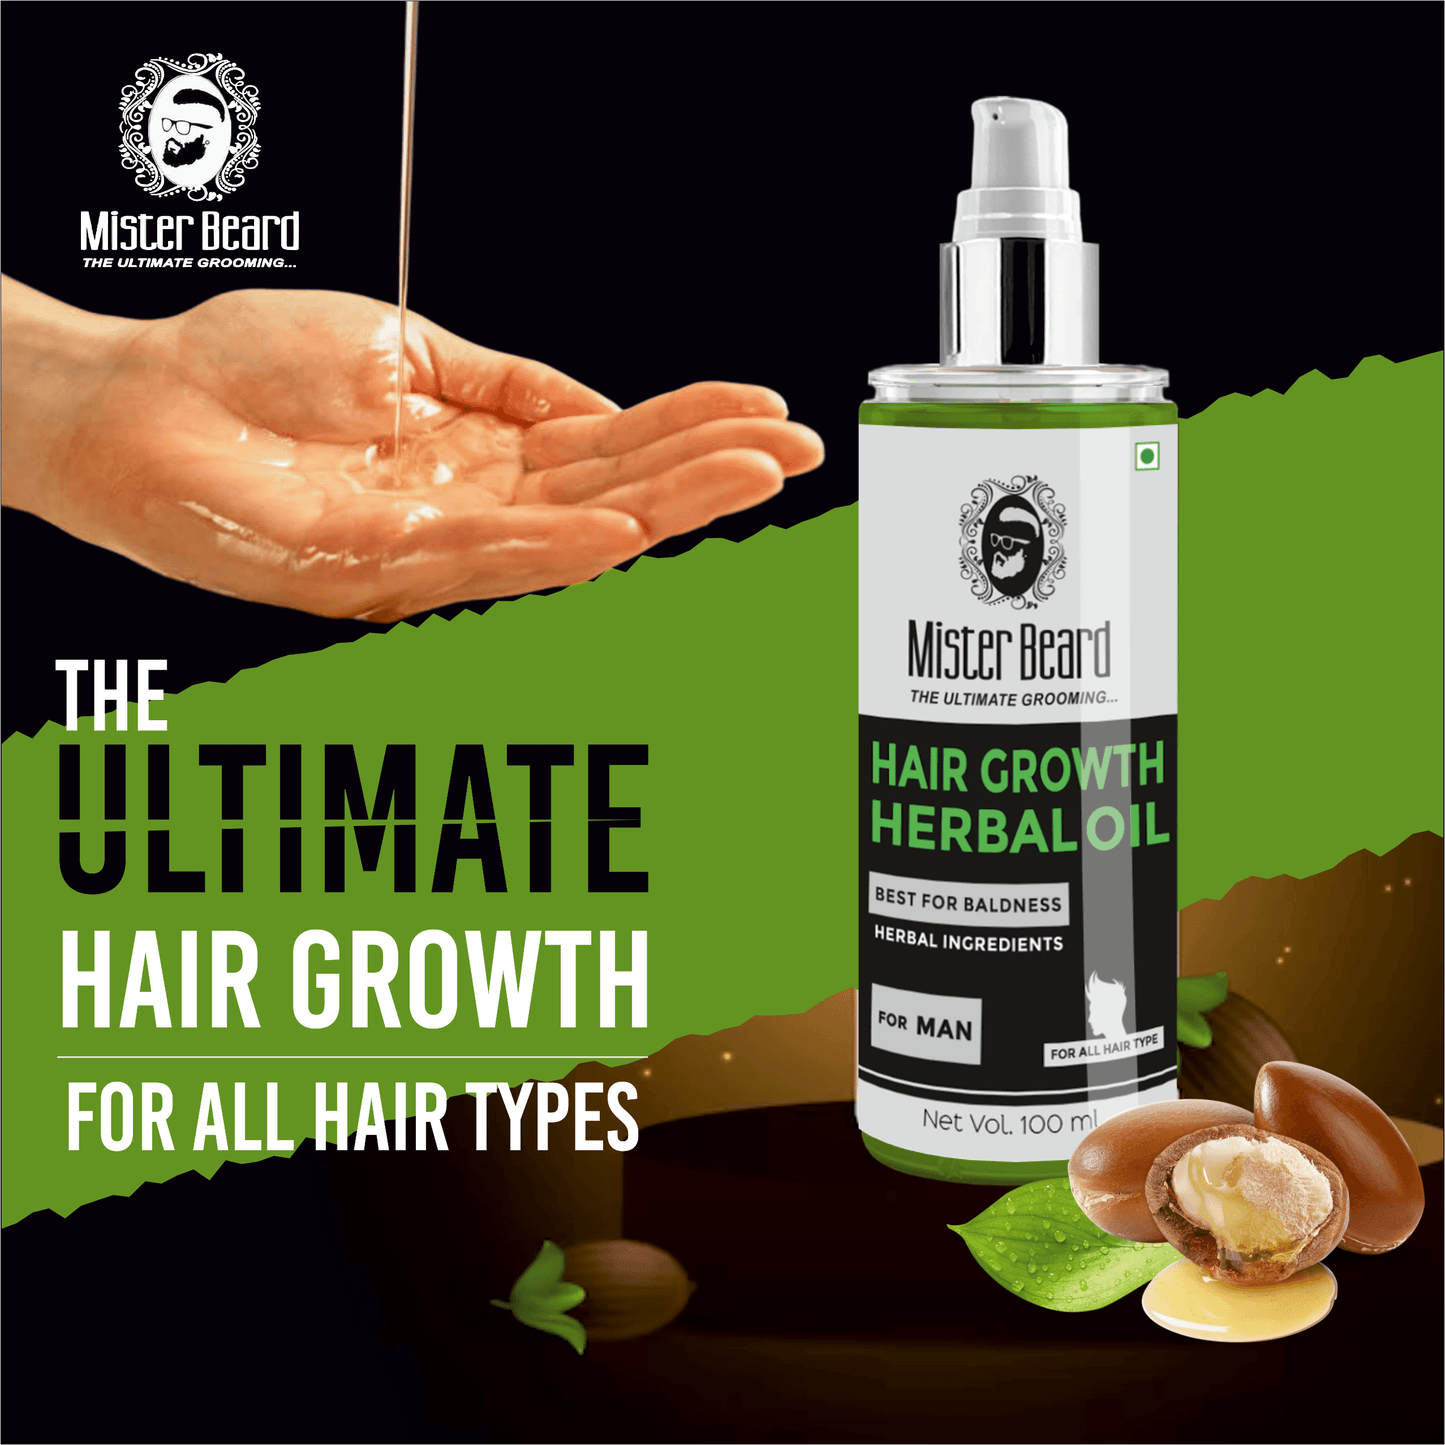 Mister Beard Hair Growth Herbal Oil|Boosts Follicles|Hair Oil With Growth Action | Guaranteed Hair Growth by Using for 3 months | Stimulates the Roots & Prevents Baldness,100ml - Pink Root